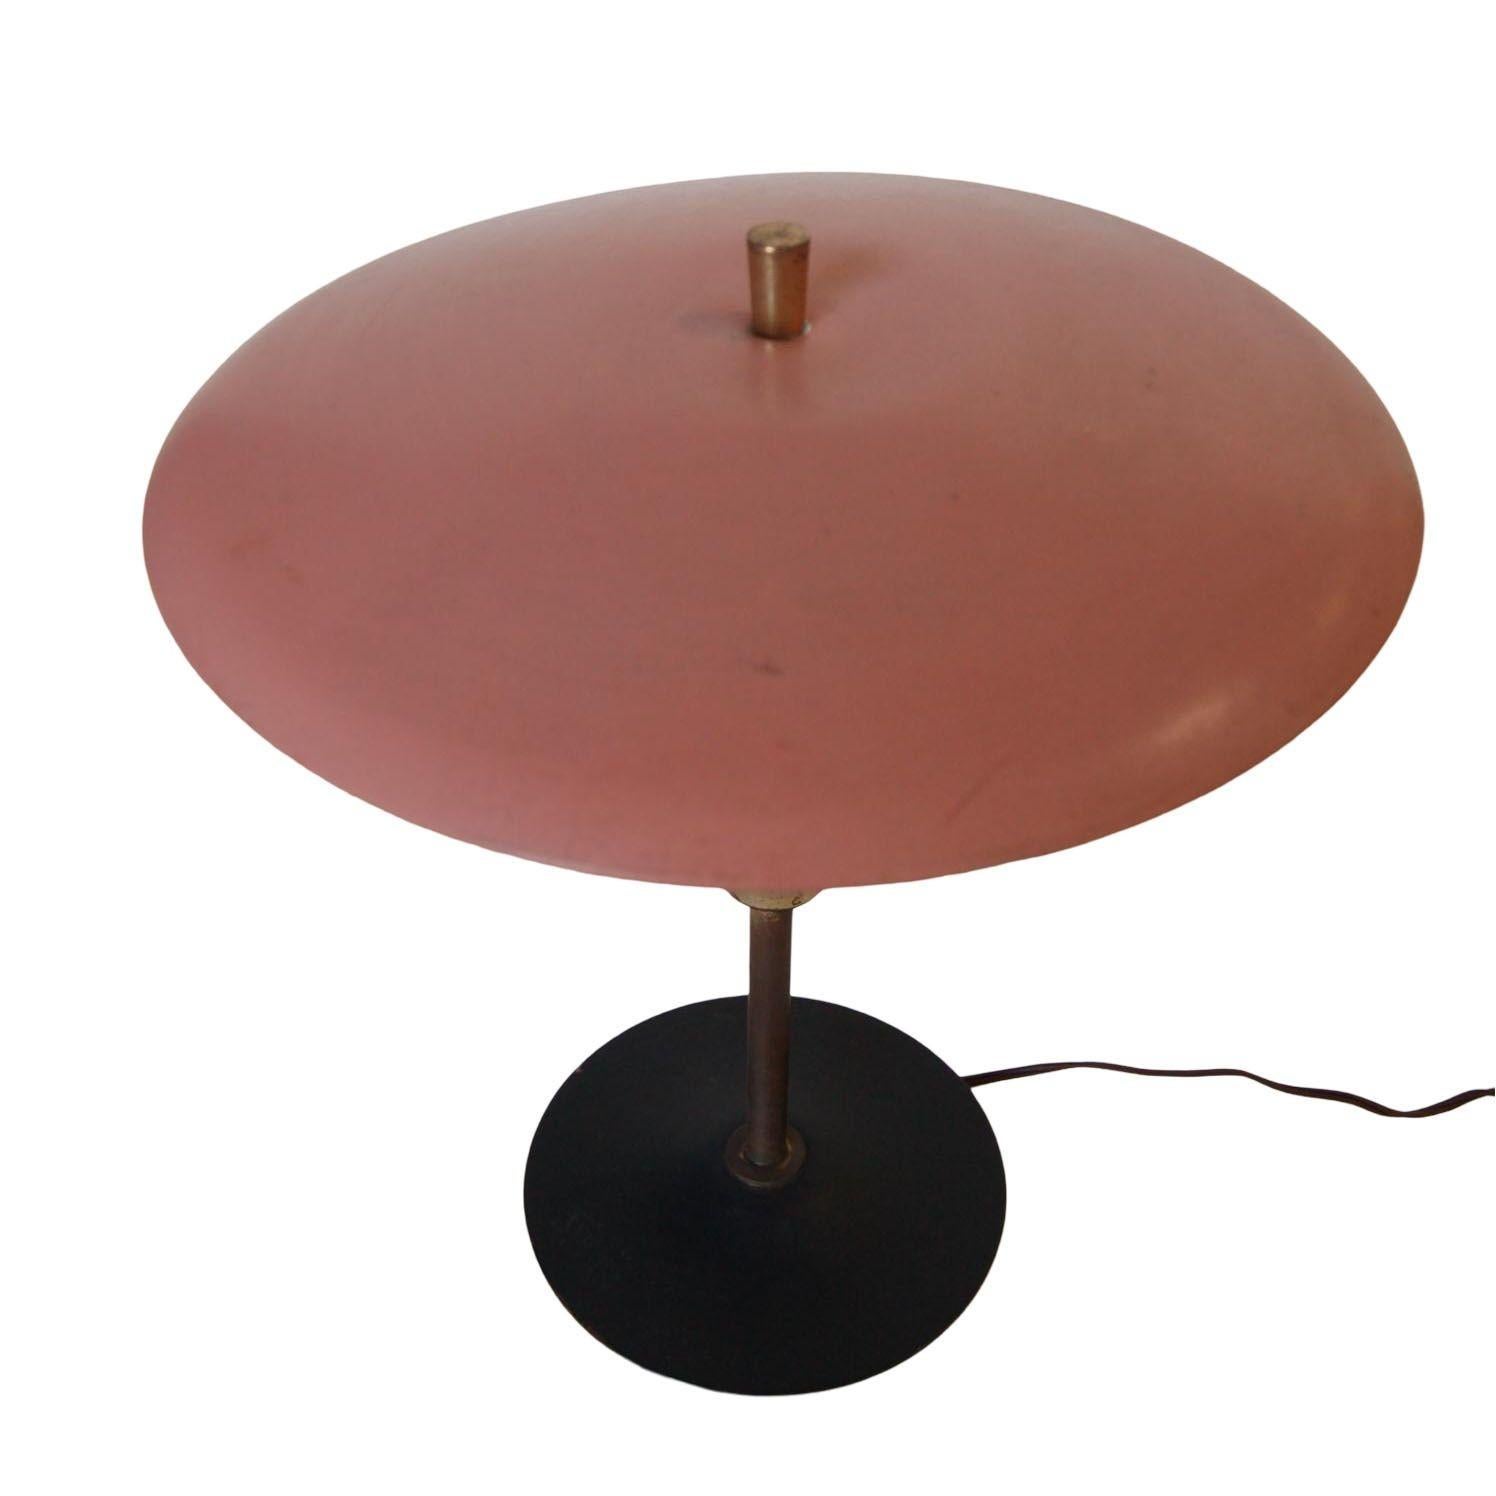 This is an authentic Art Deco style Industrial saucer lamp from the 1960s in original salmon pink color with black and gold trim. This atomic age lamp can be used for home or office. Shade measures: 13